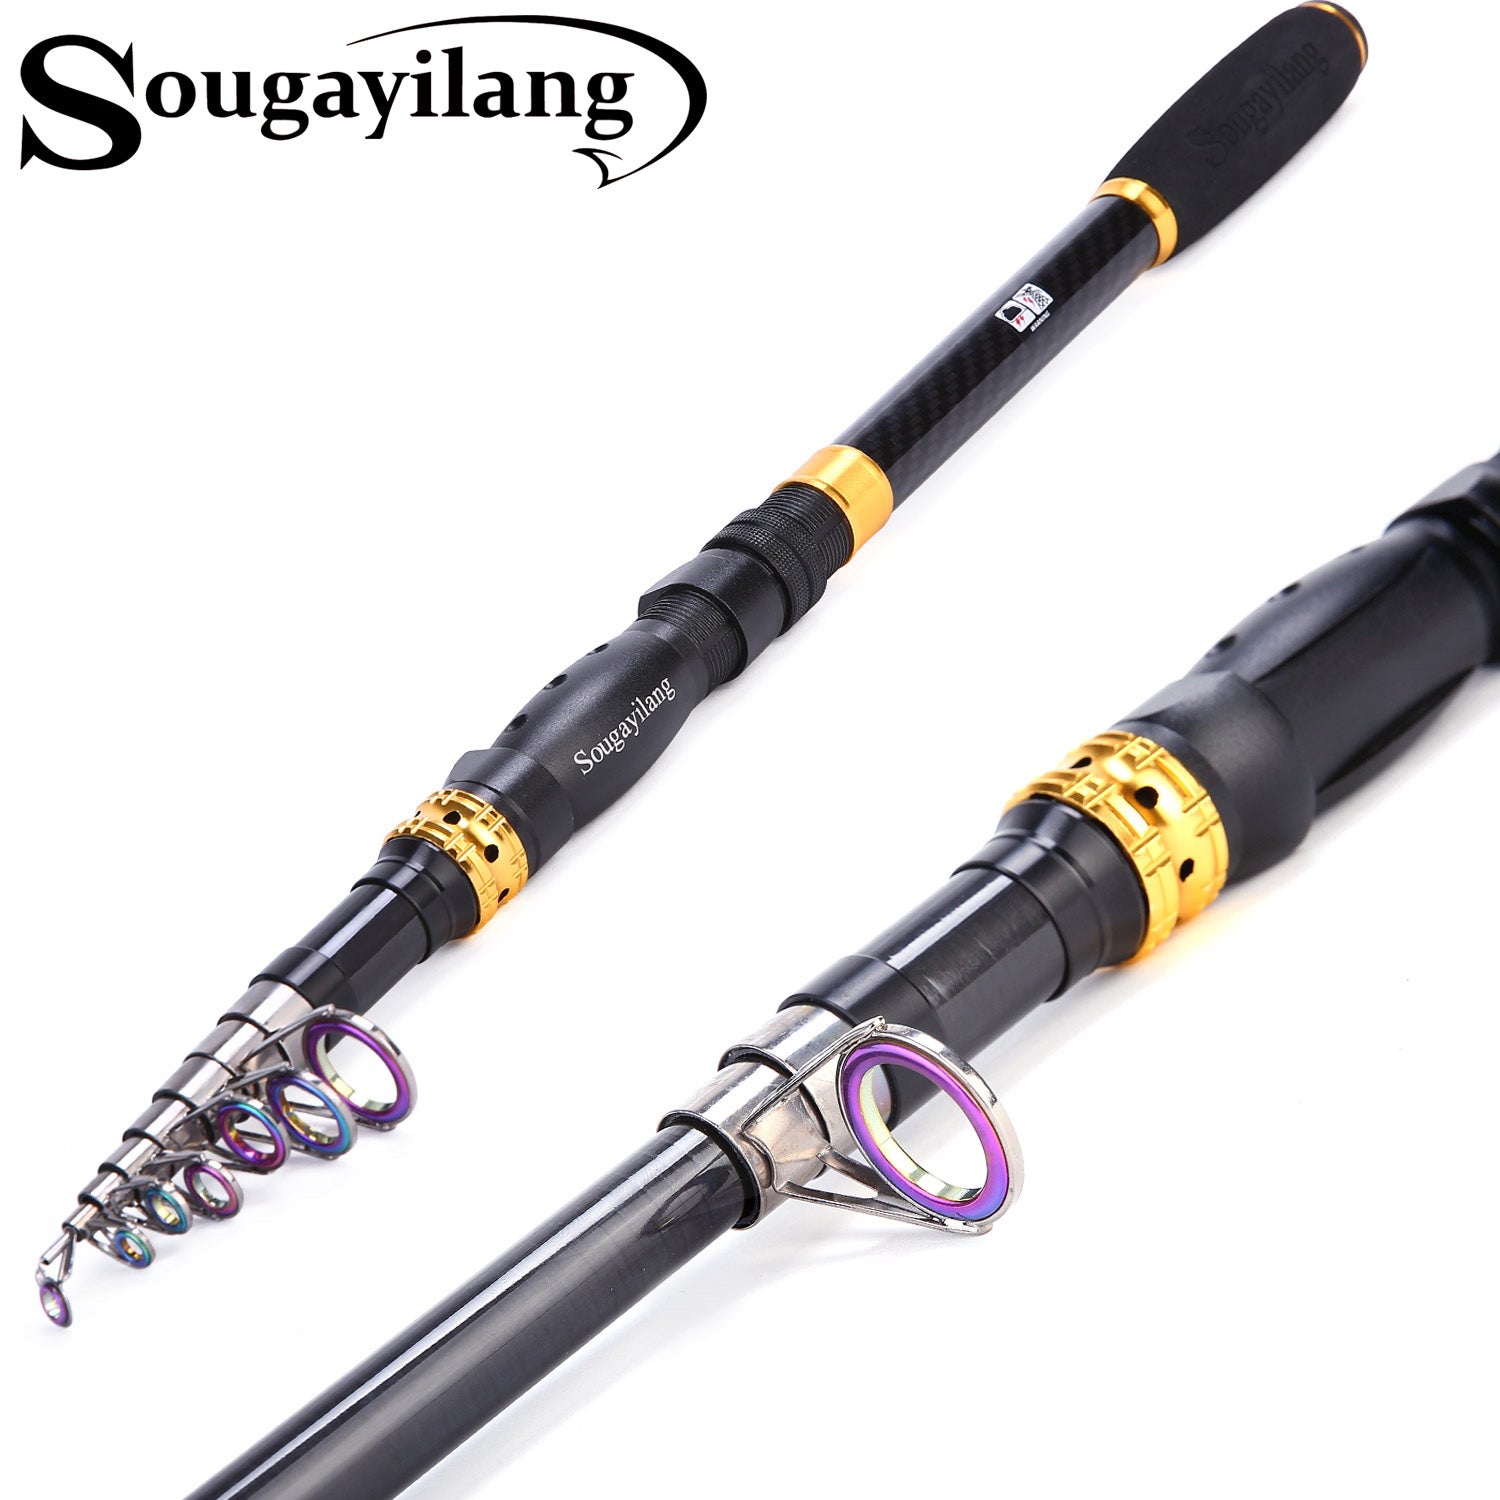 discount onlinestore Fishing Rod and Reel Combo, Graphite Telescoping Fishing  Pole Collapsible Portab